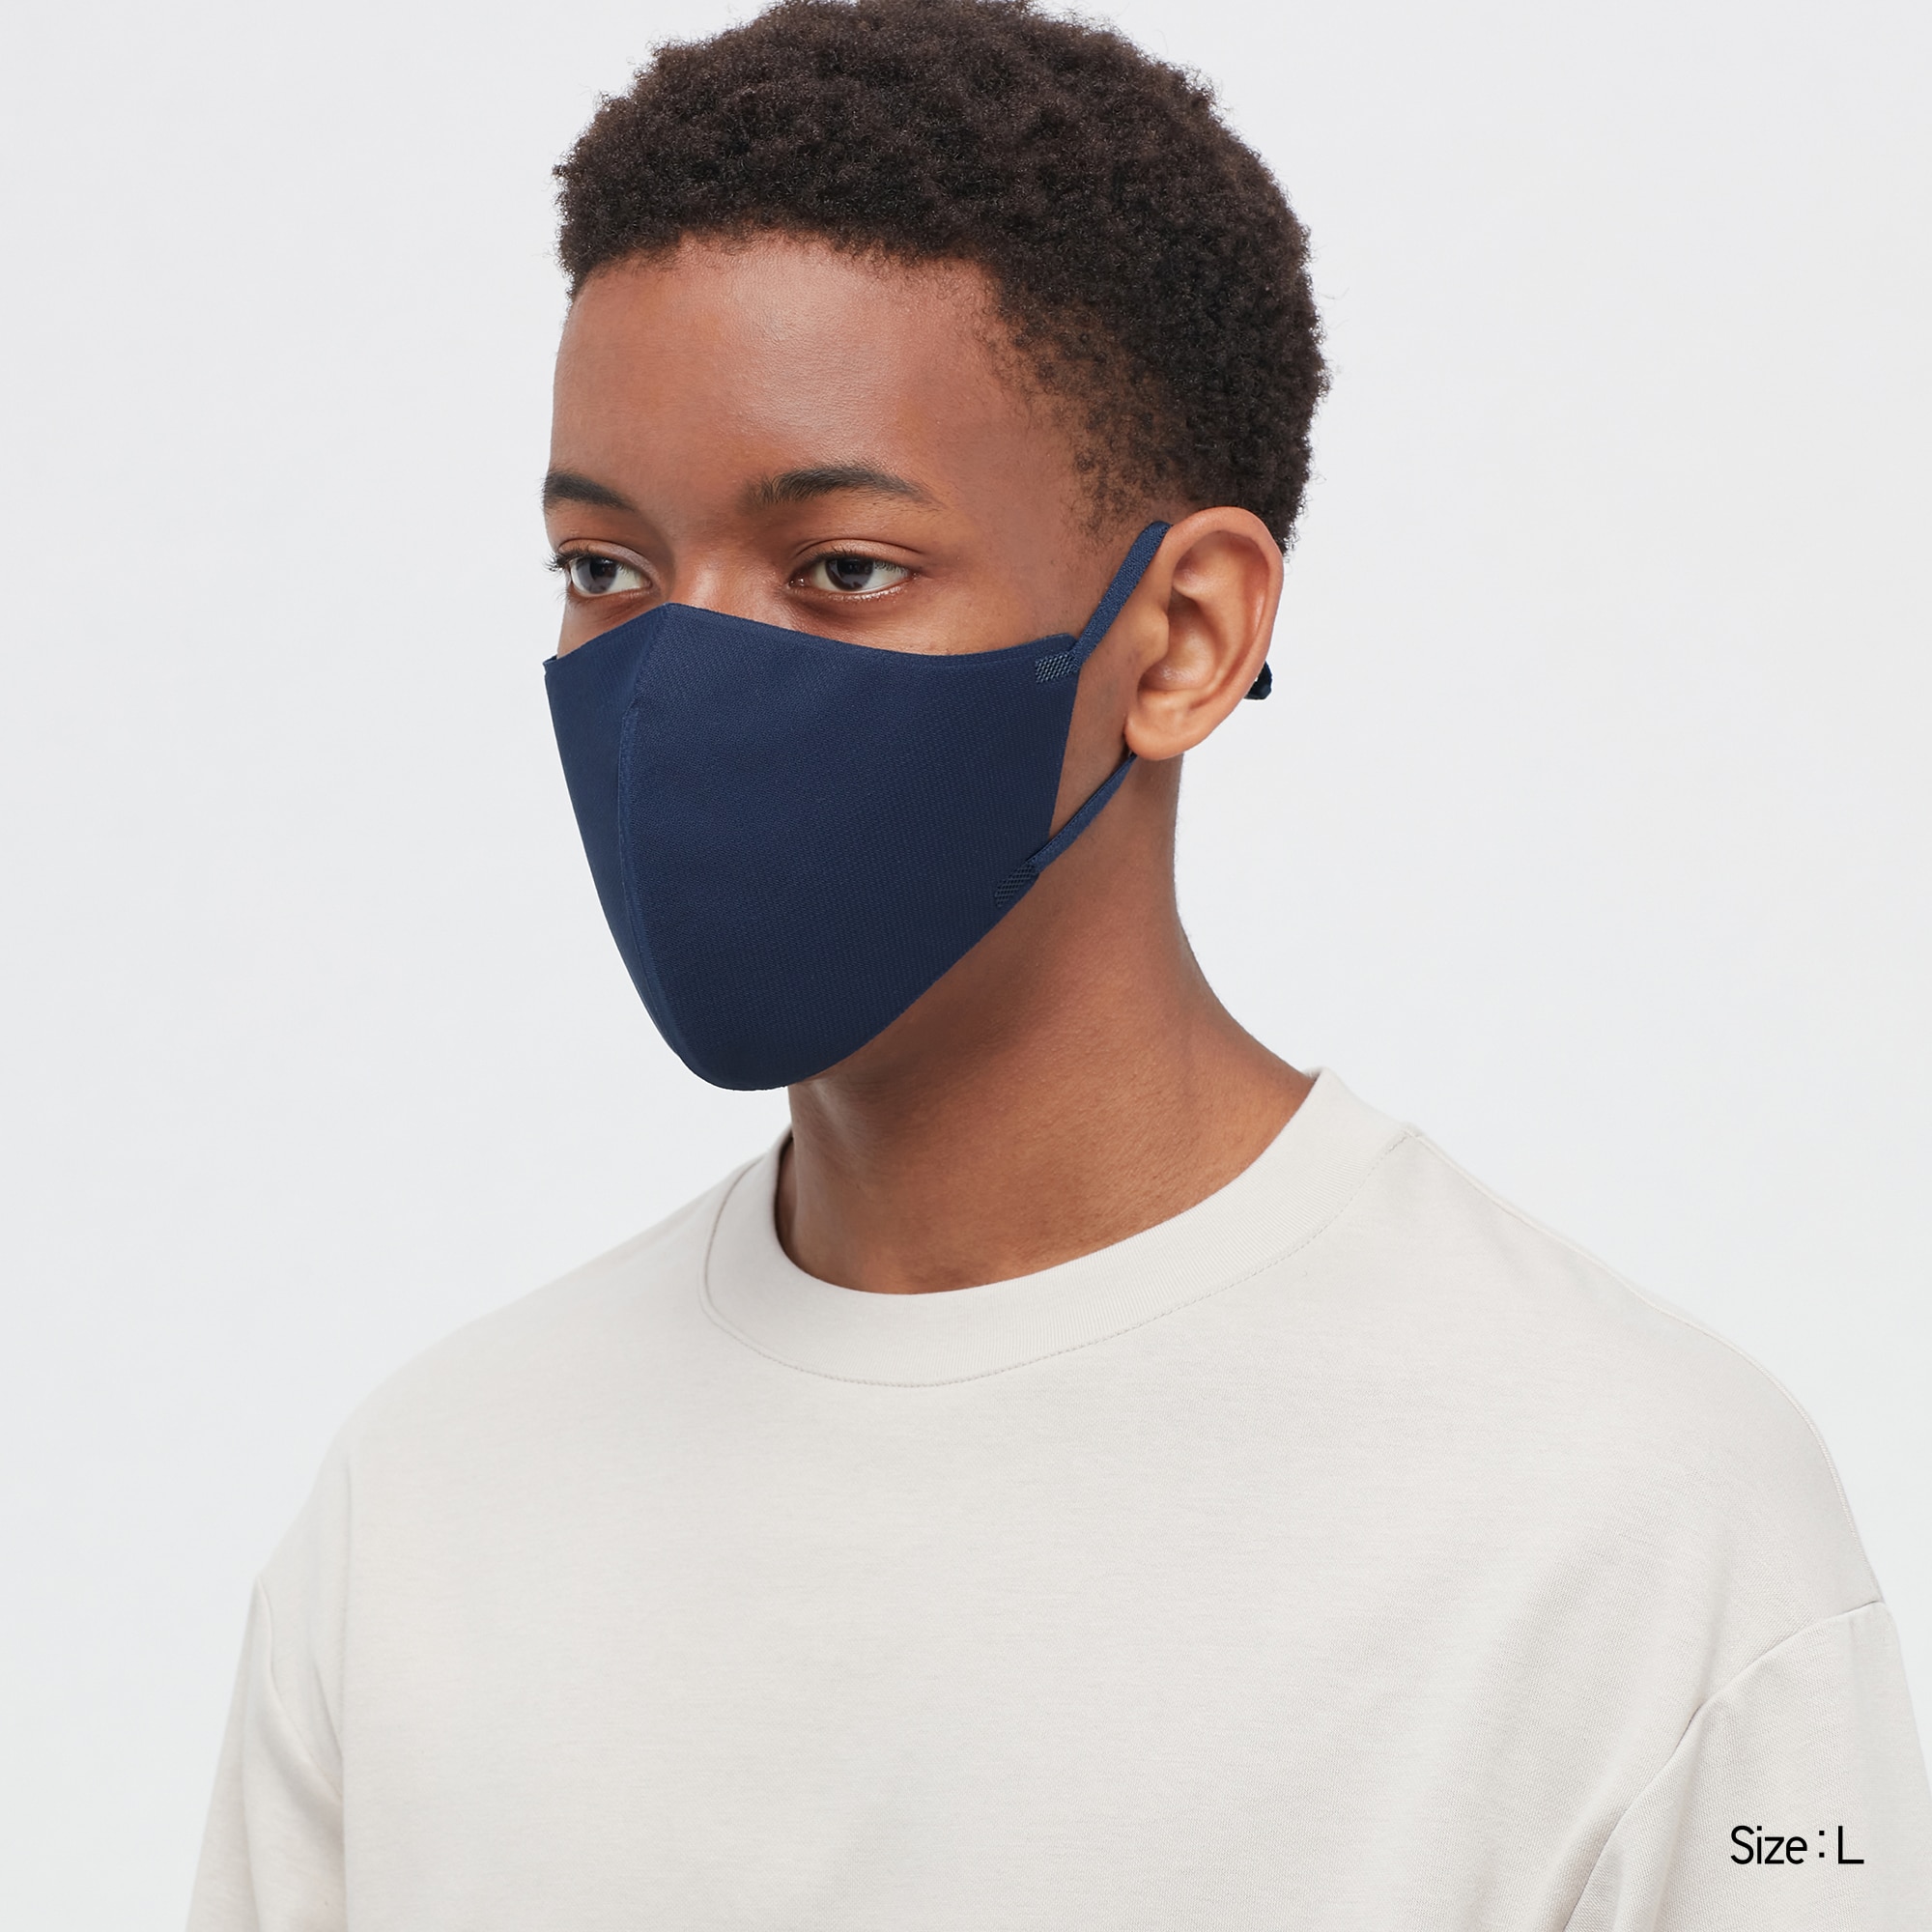 Customers race to Uniqlo for new summer face masks but are they really  worth the hype  SoraNews24 Japan News